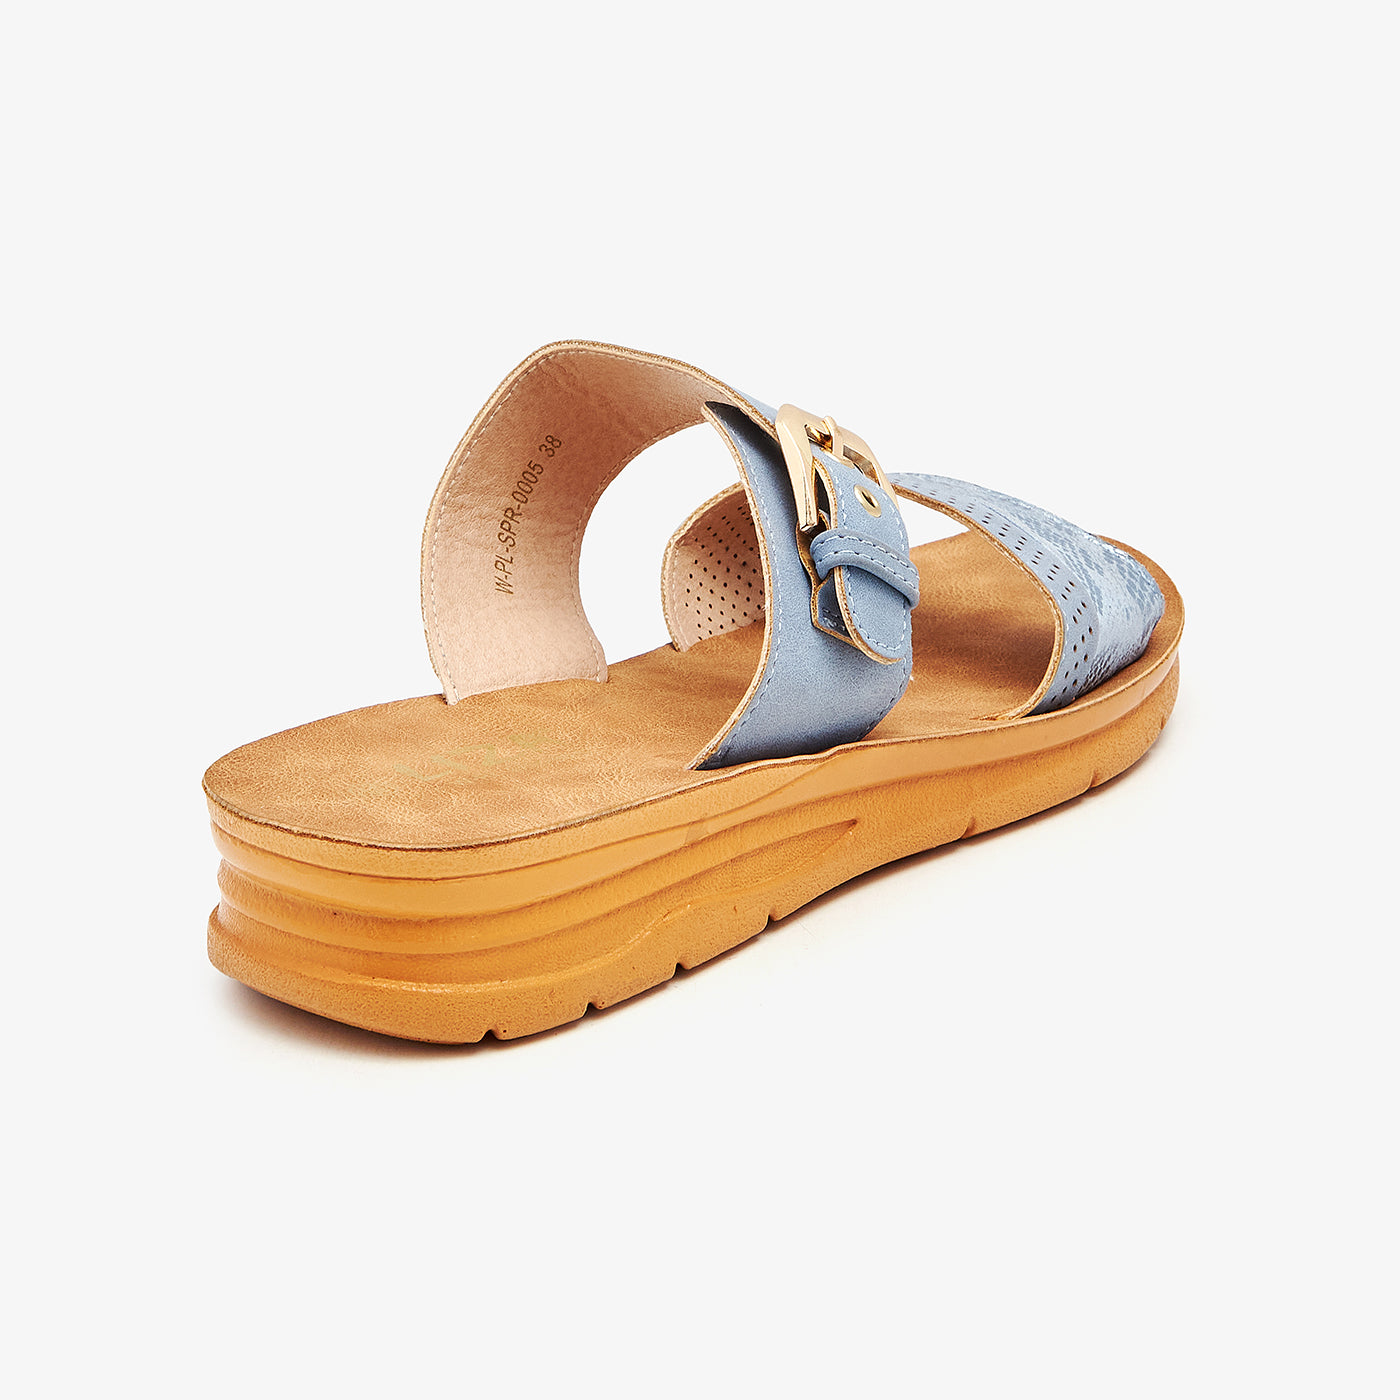 Buckled Chappals for Women